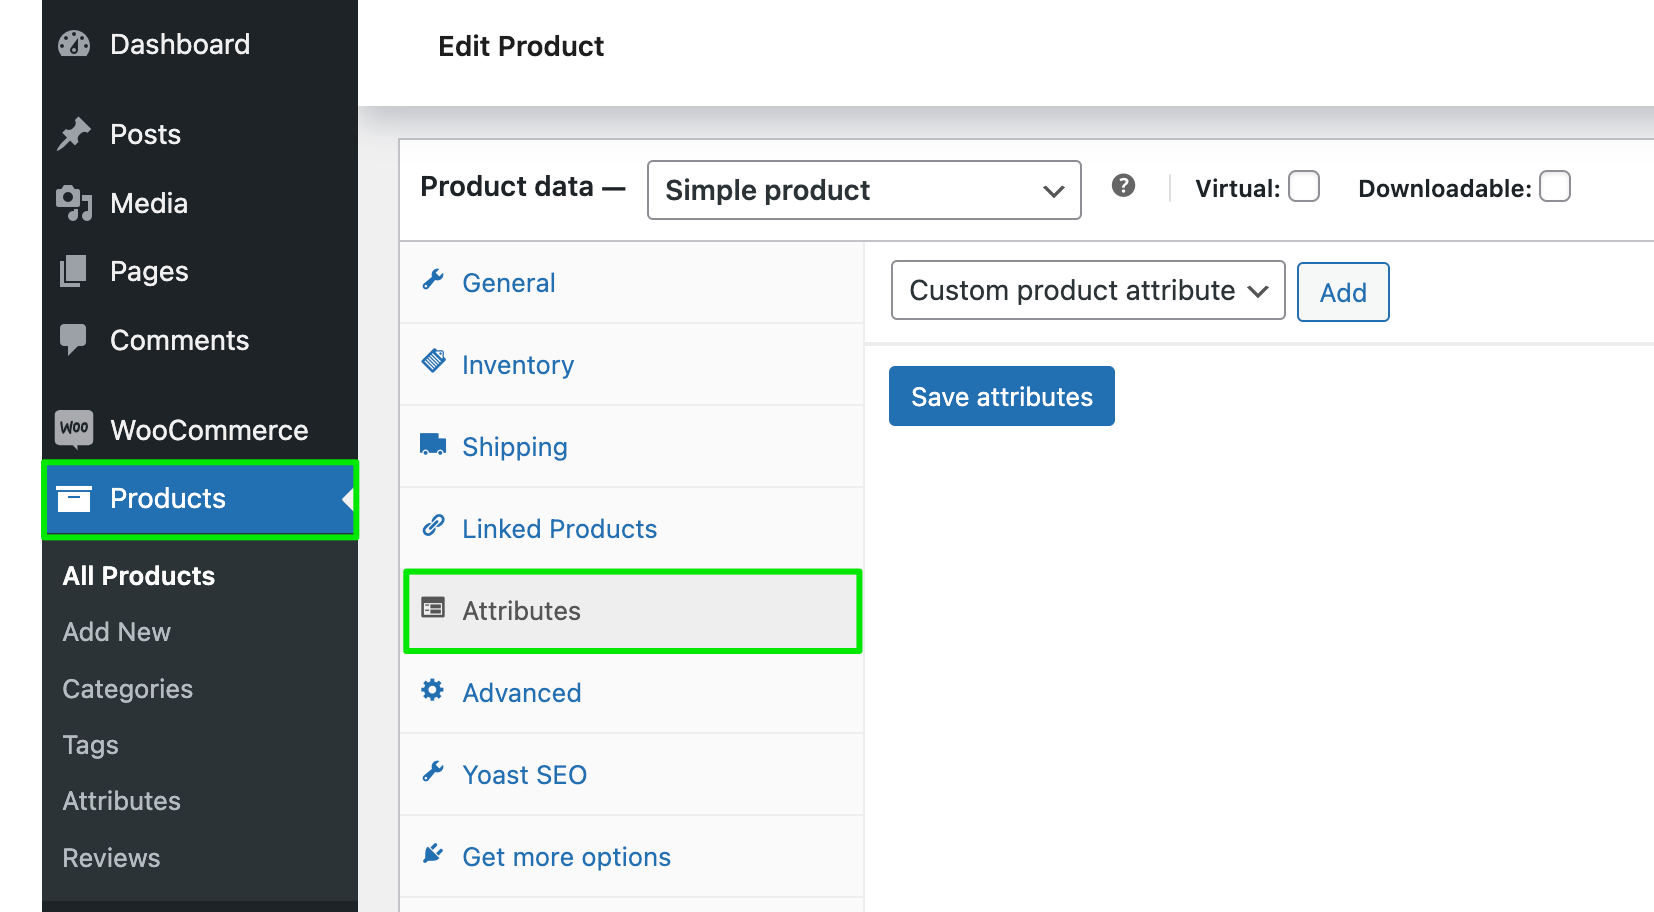 Screenshot showing the Attributes tab in the Product data box